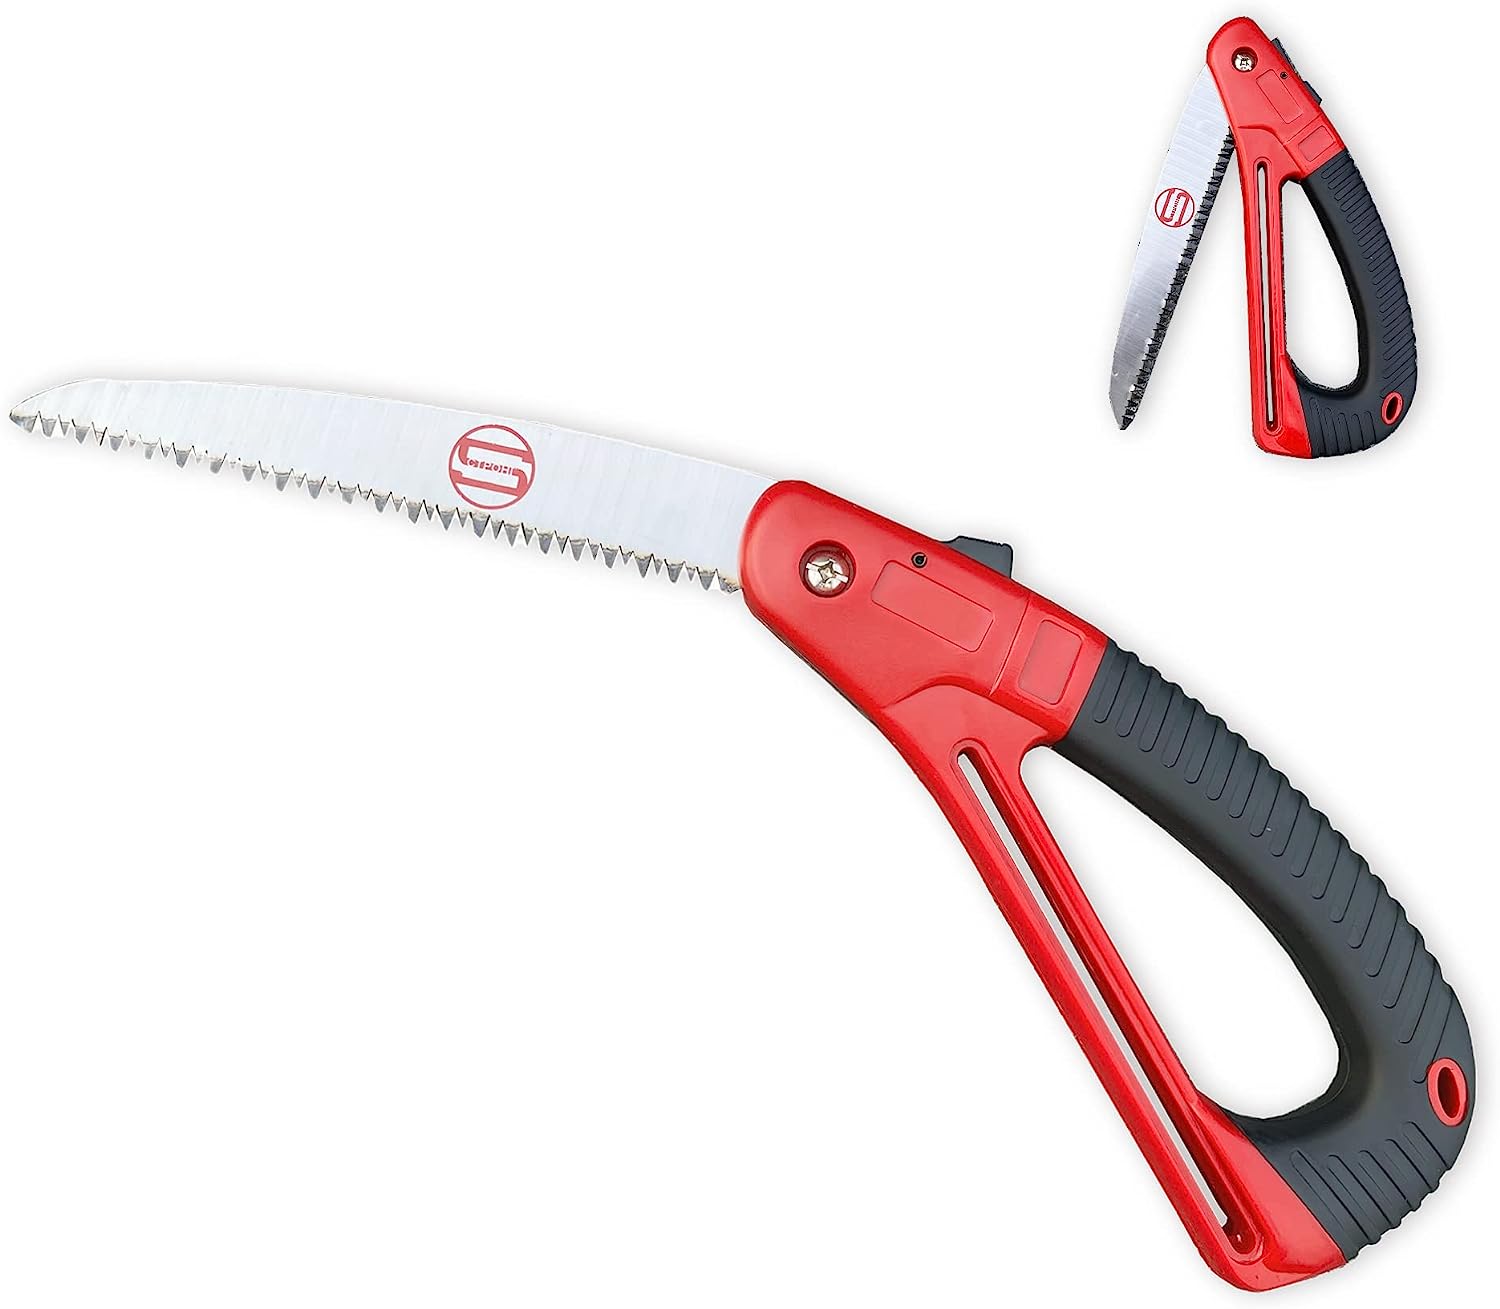 Ccfetch Folding Saw 7 Inch Long Blade Hand Protection [...]